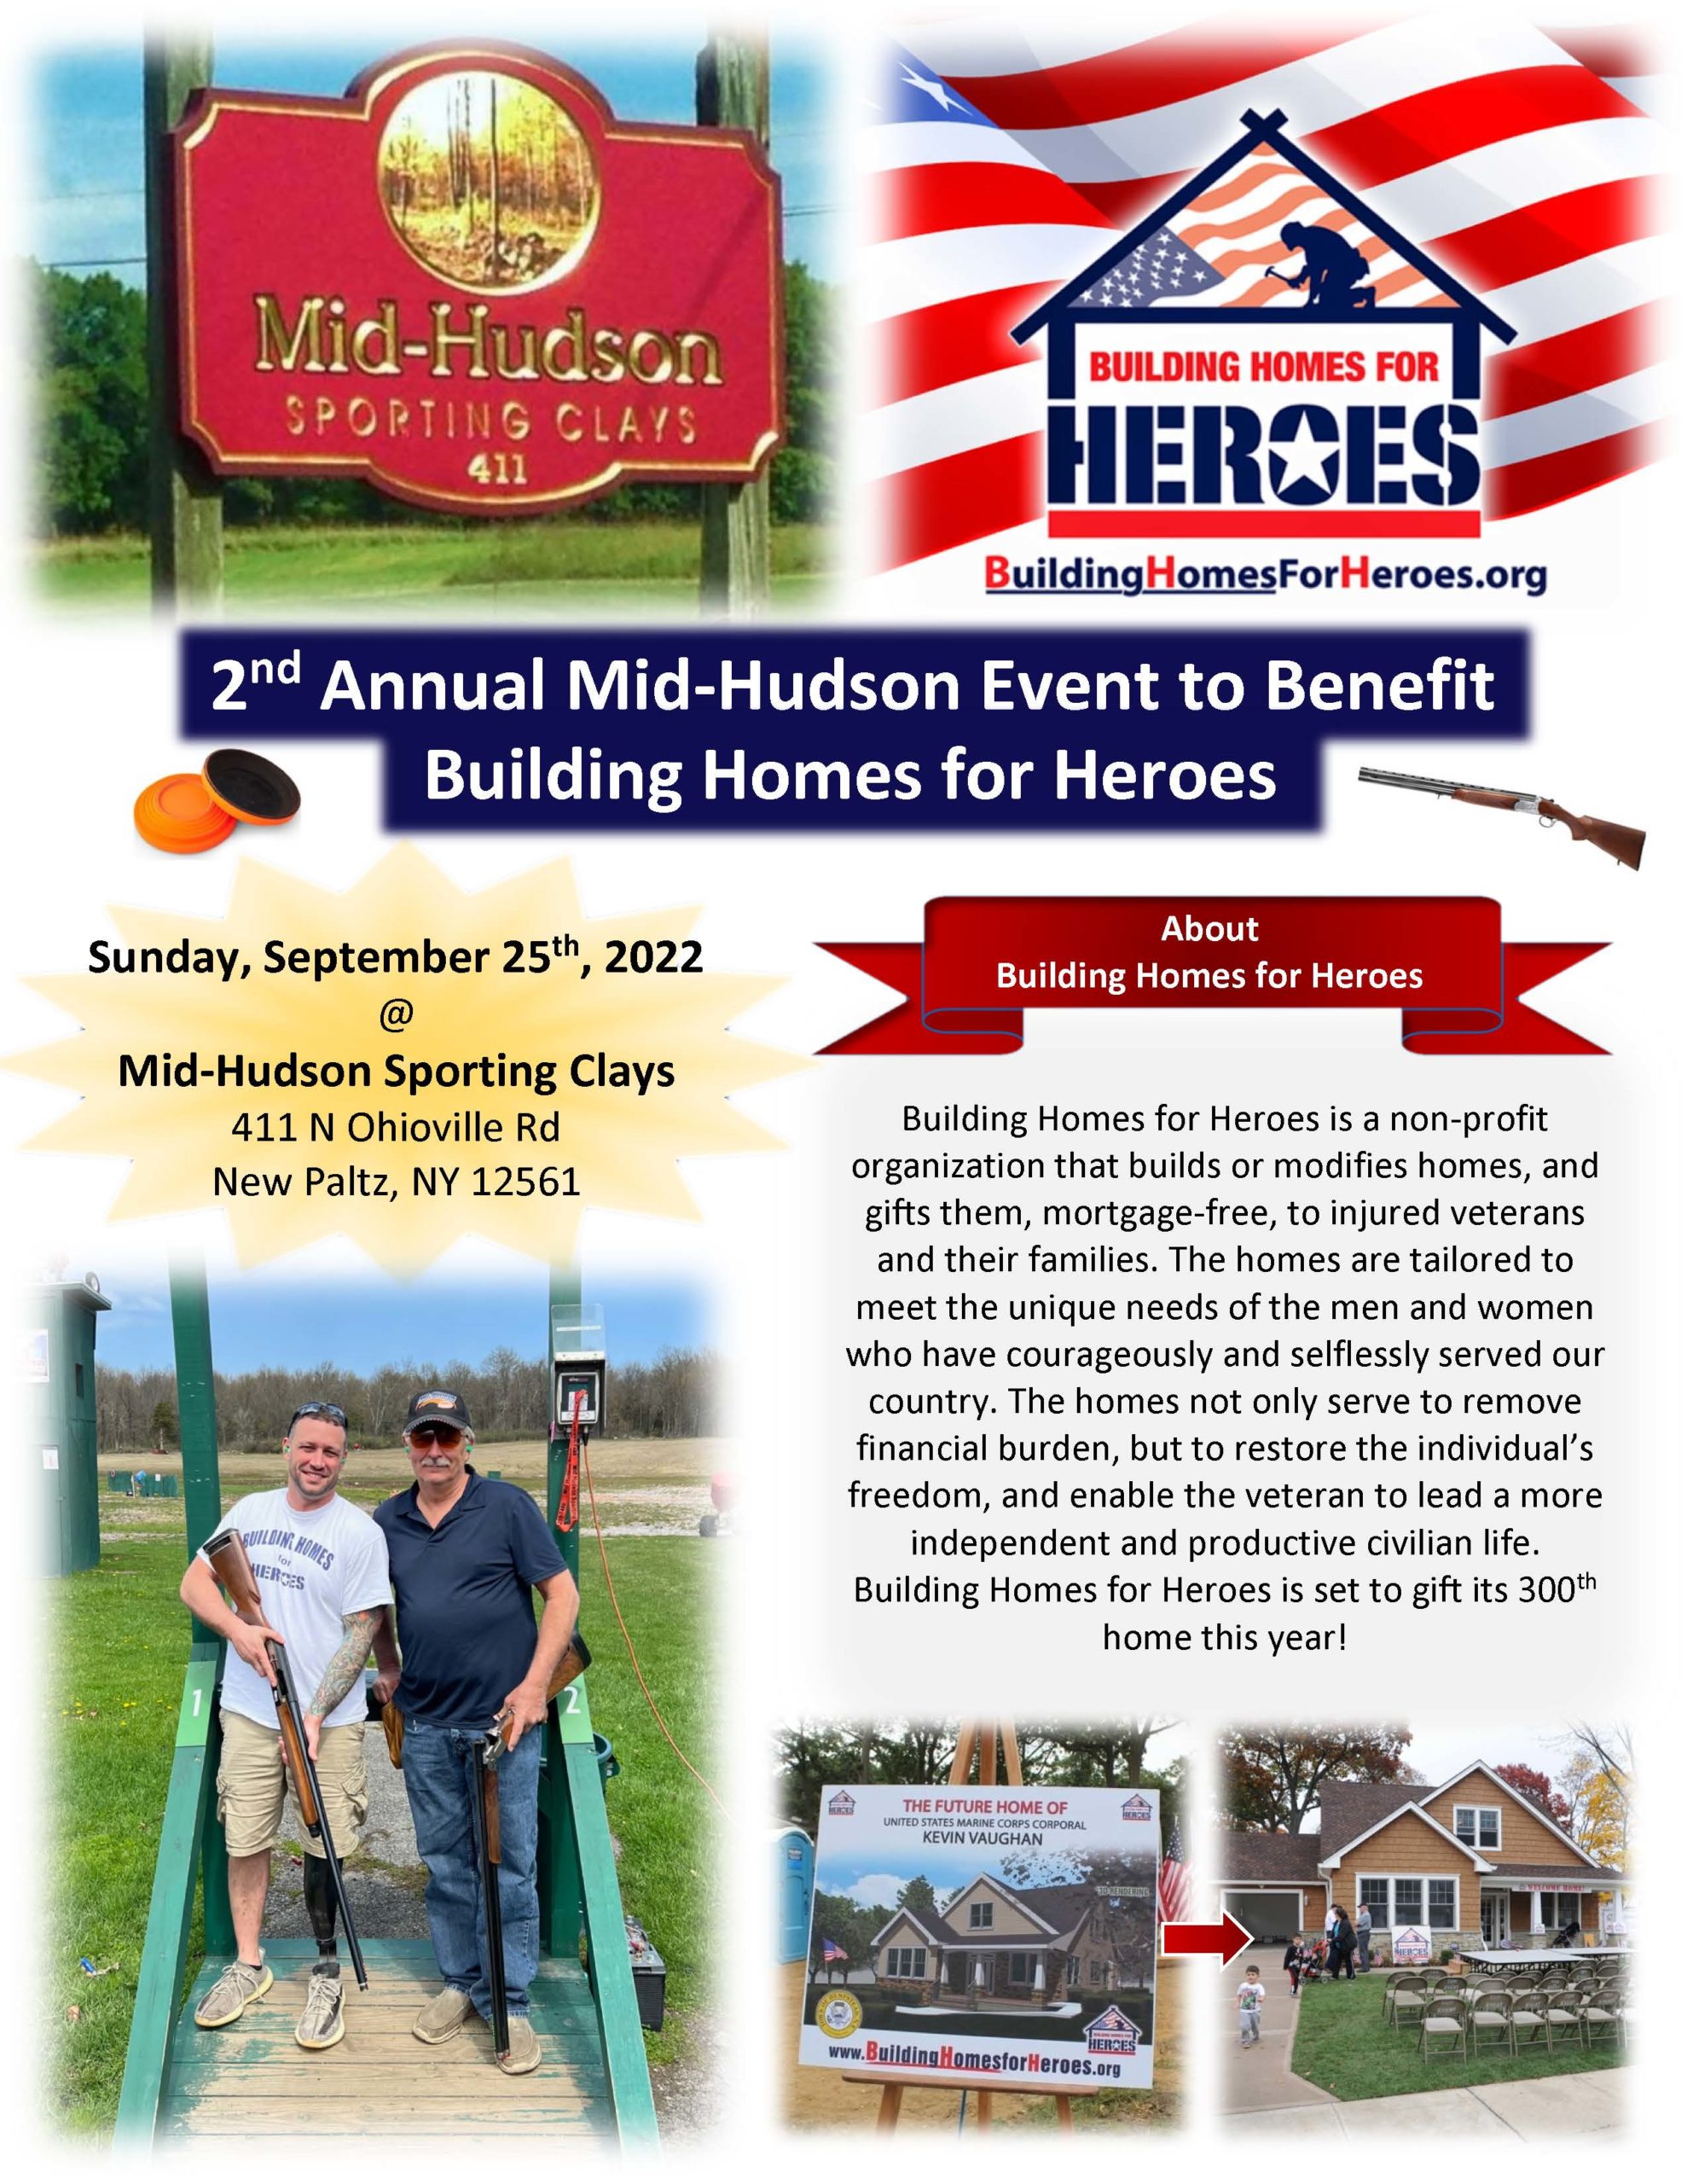 2nd Annual Mid-Hudson Event